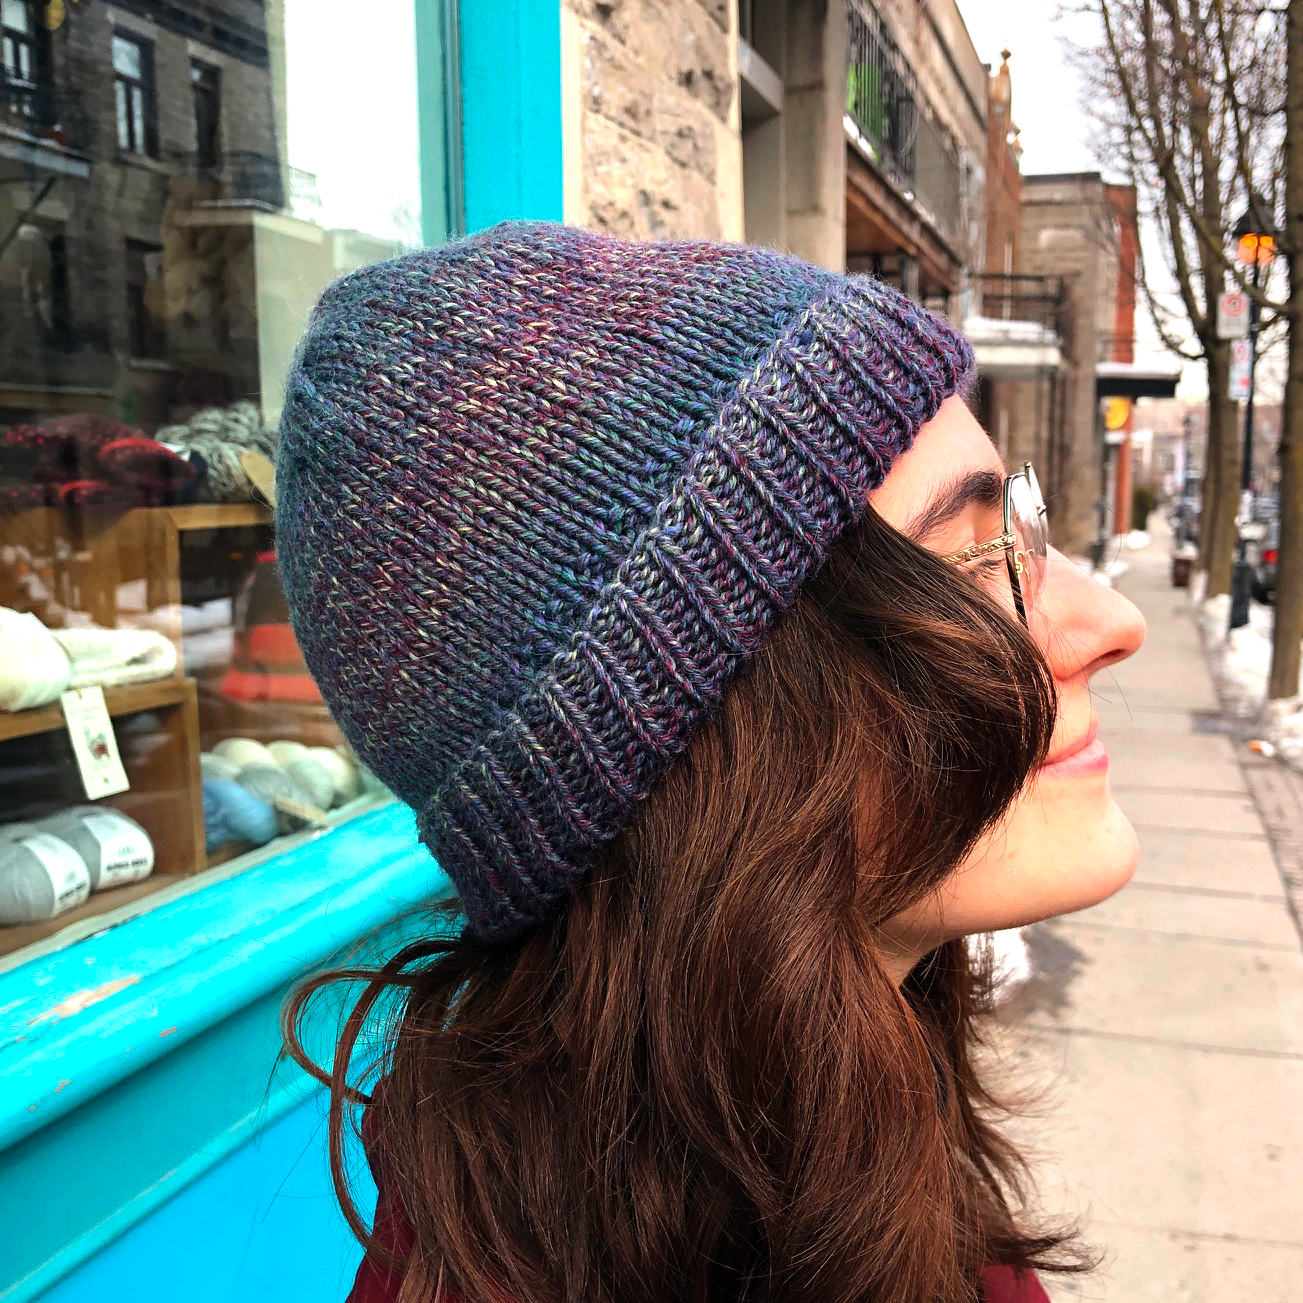 Pattern for the OCHO tuque by Aline Daman